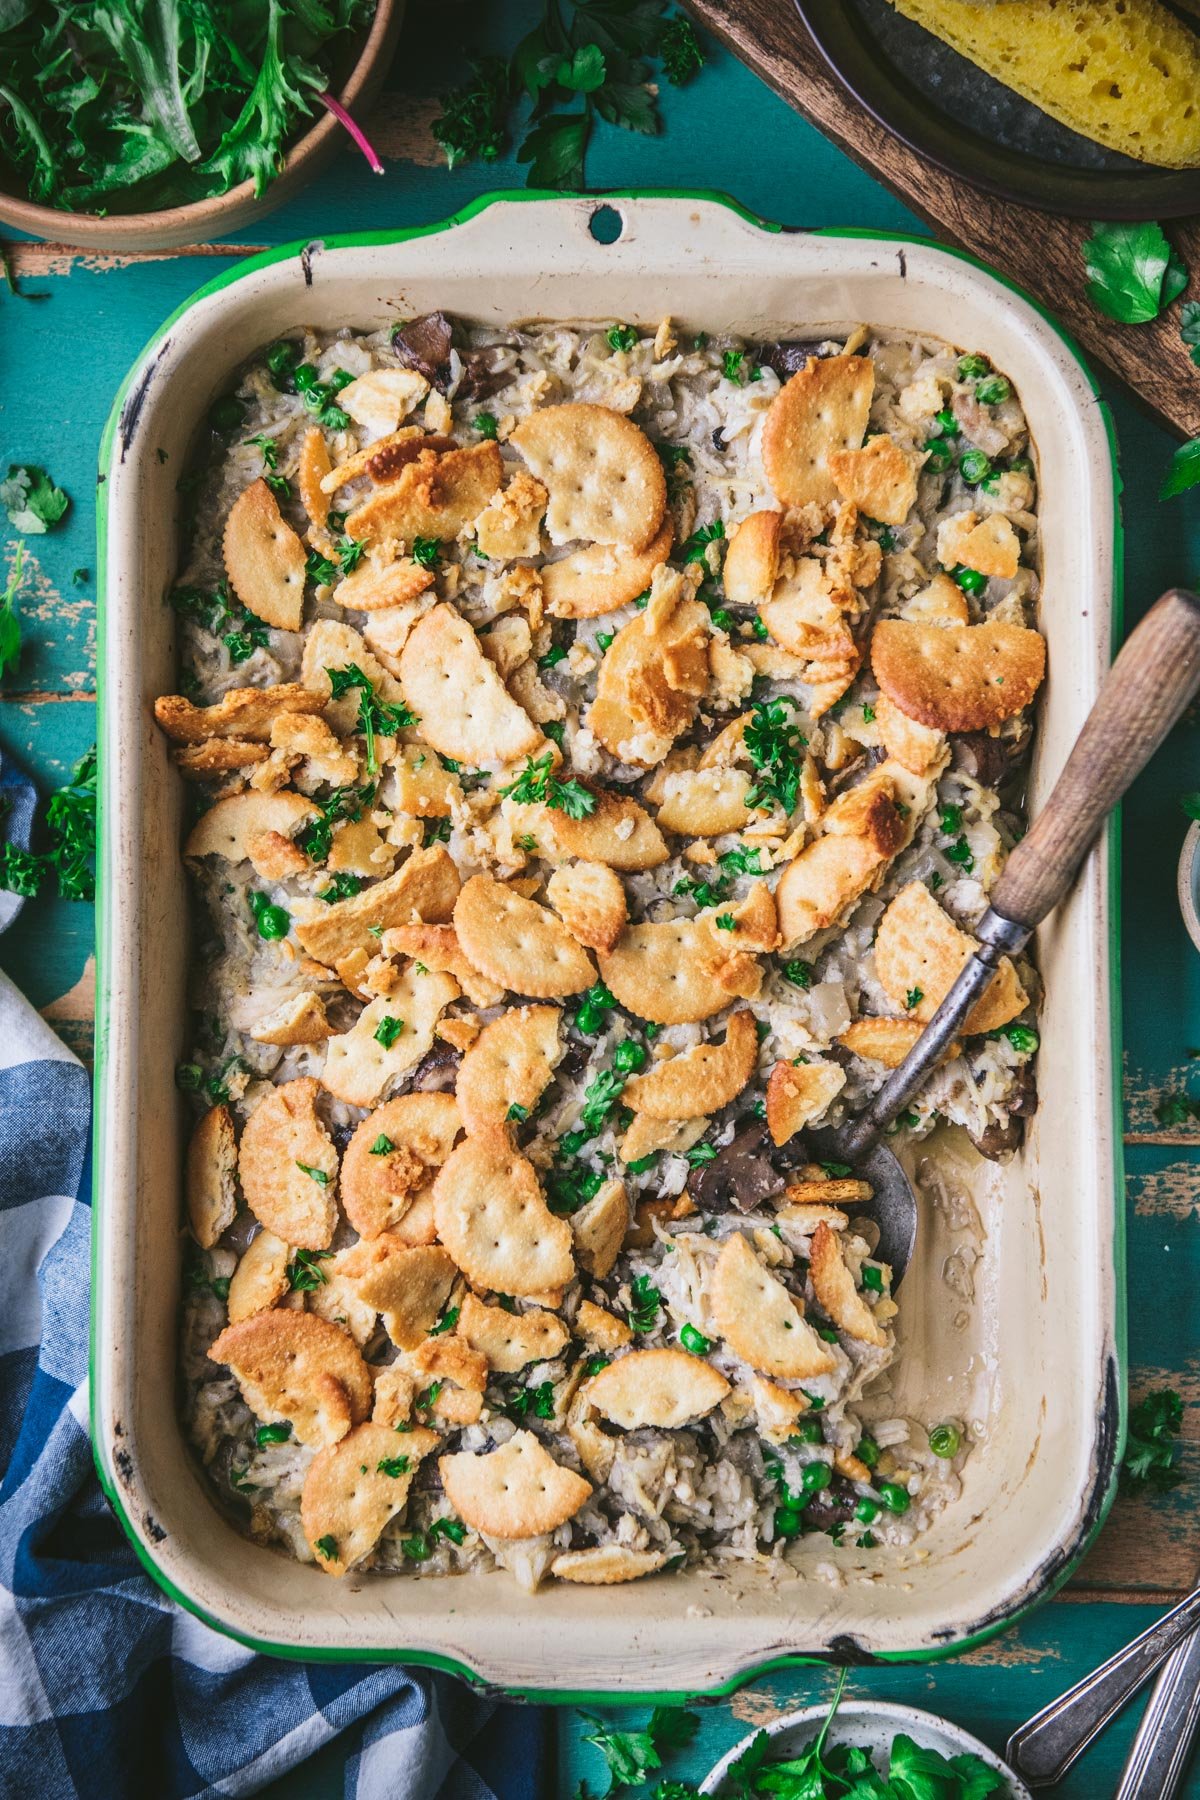 Overhead shot of a pan of chicken mushroom rice casserole on a turquoise vintage wooden table with side salad and cornbread